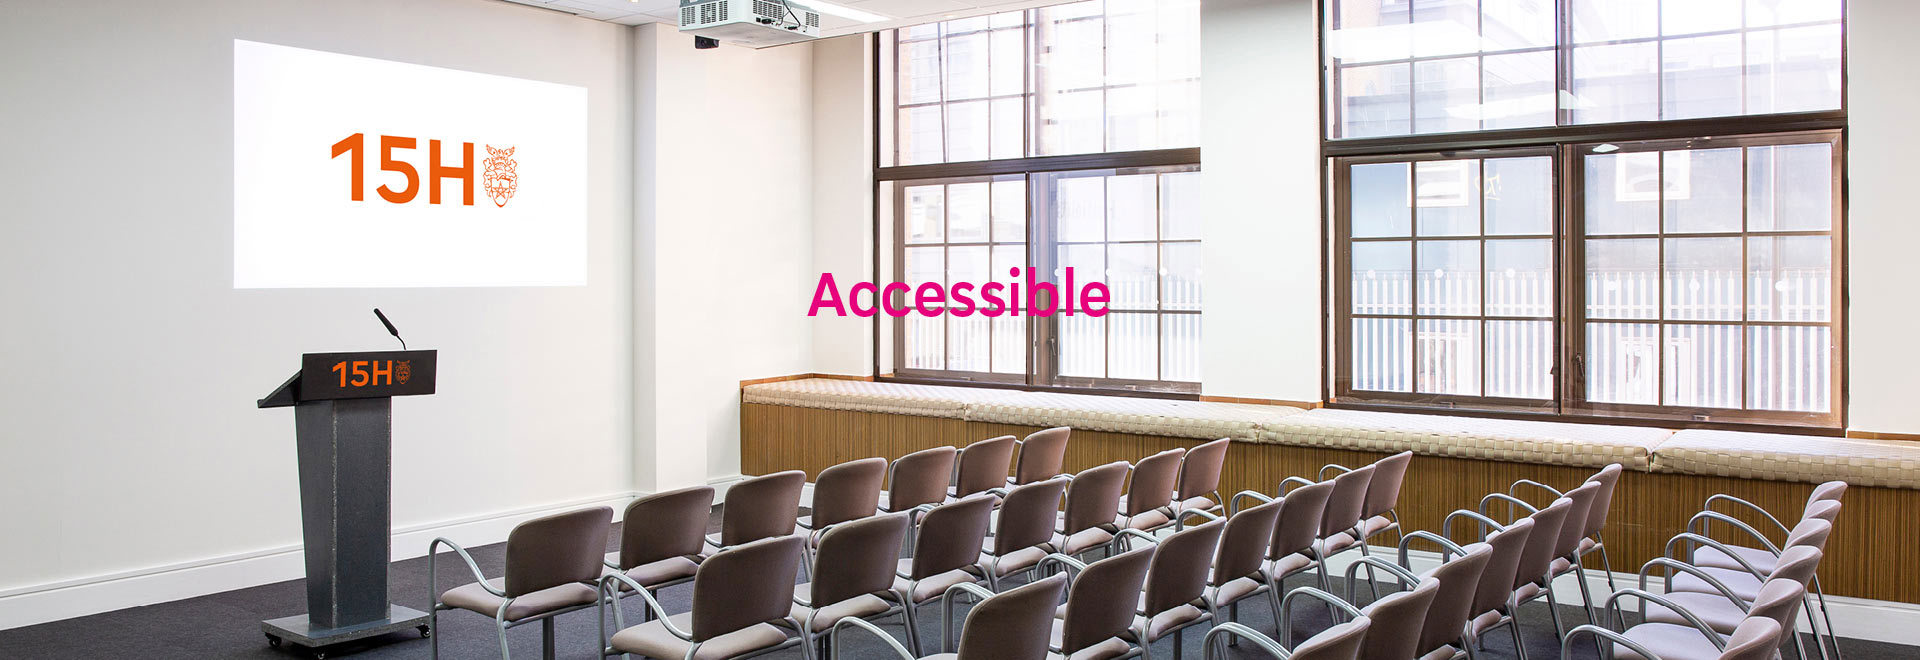 15Hatfields conference room with the word 'Accessible'